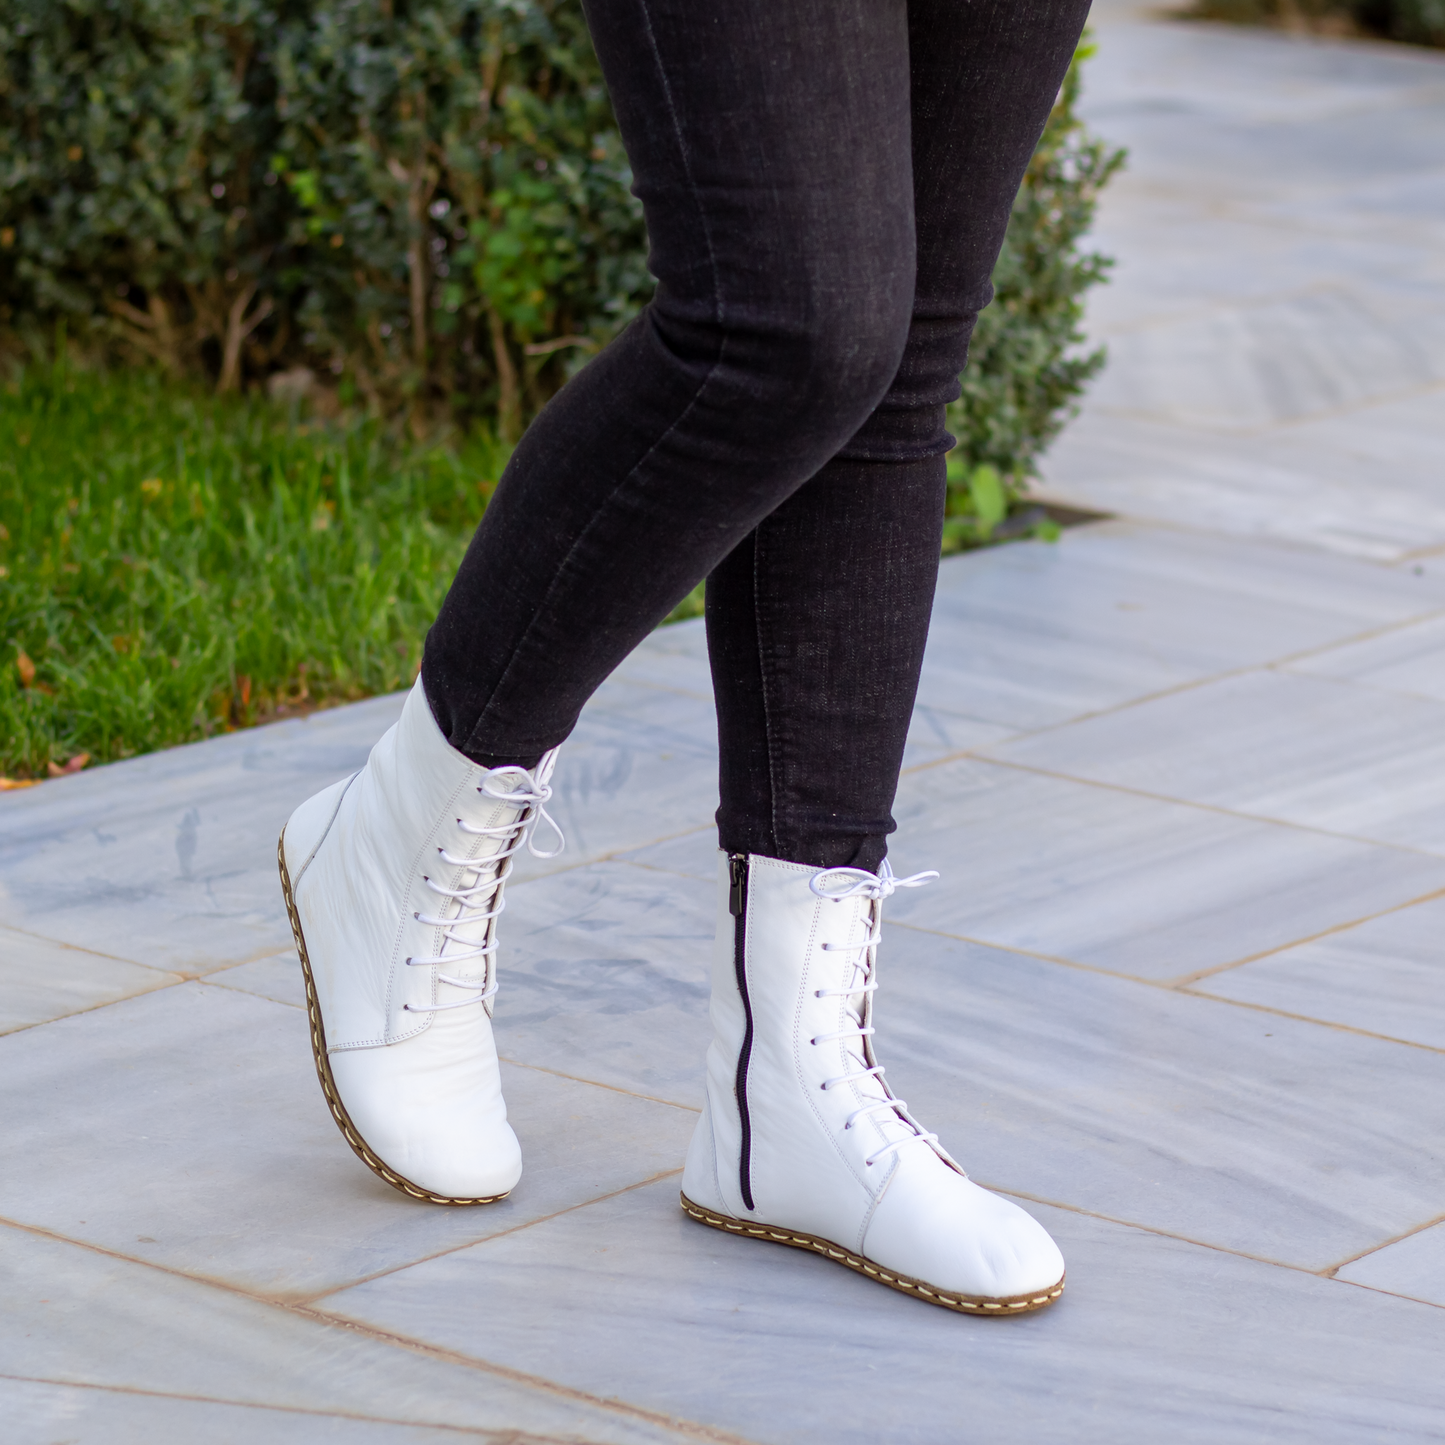 White Boot | Barefoot Boots Women | Earthing Leather Boots | Grounding Copper Rivet | Buffalo Leather Outsole | White